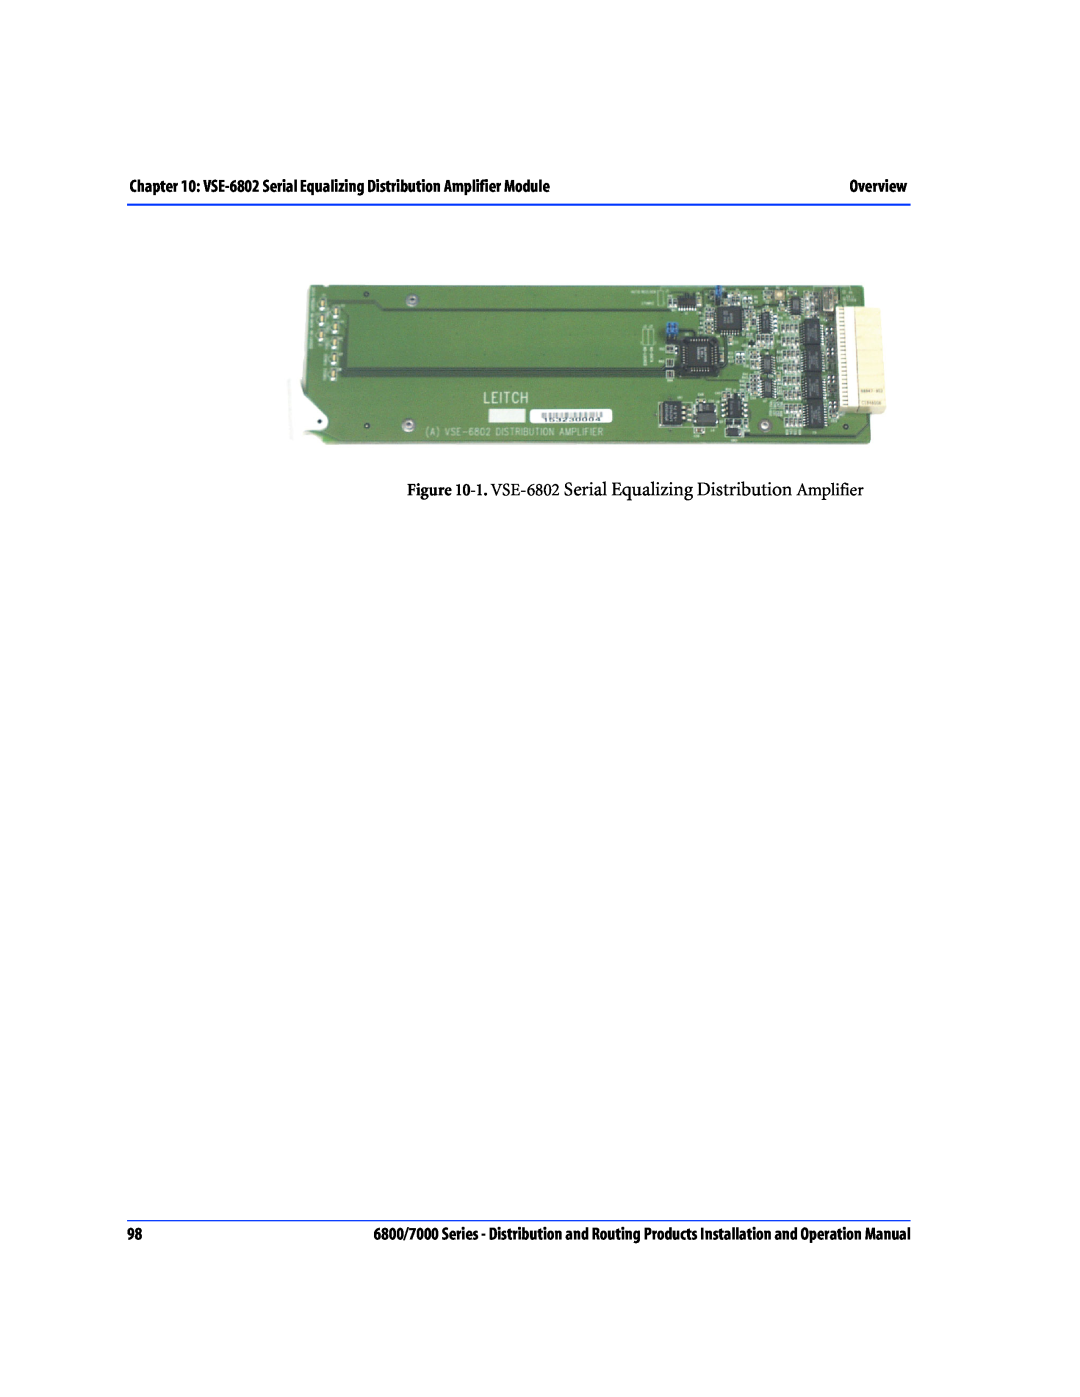 Nokia 7000 Series, 6800 Series operation manual VSE-6802 Serial Equalizing Distribution Amplifier Module, Overview 